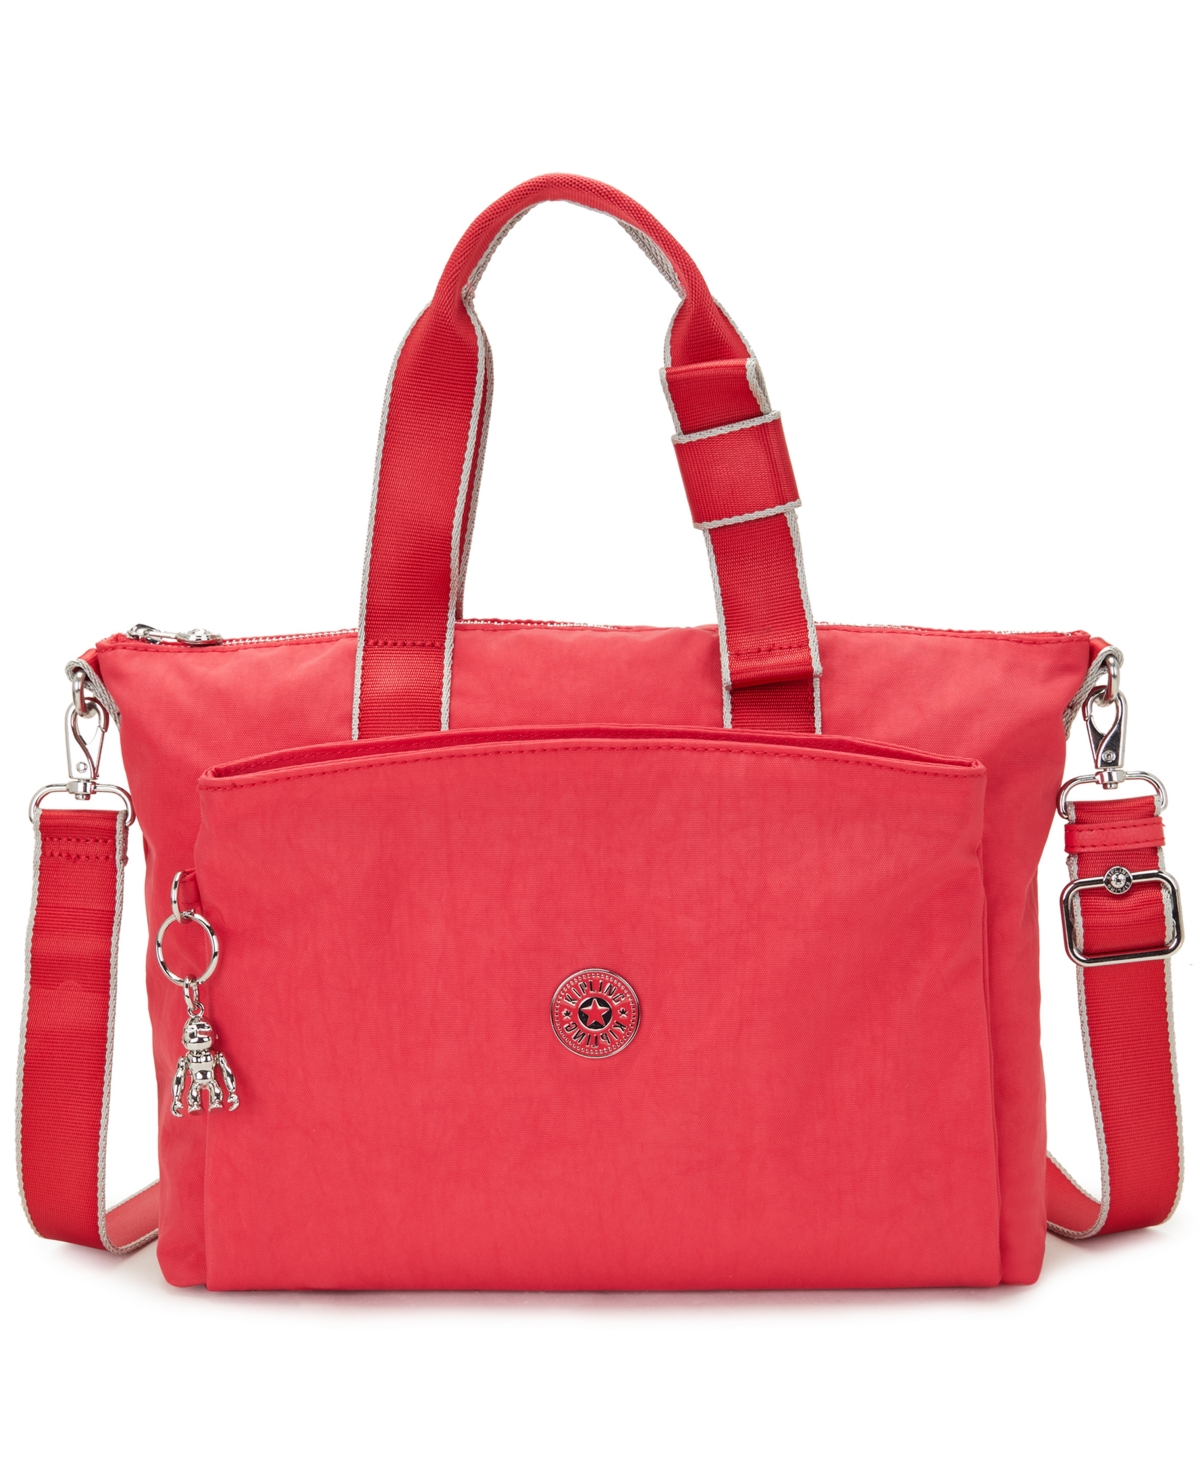 Kassy Tote - Party Pink M